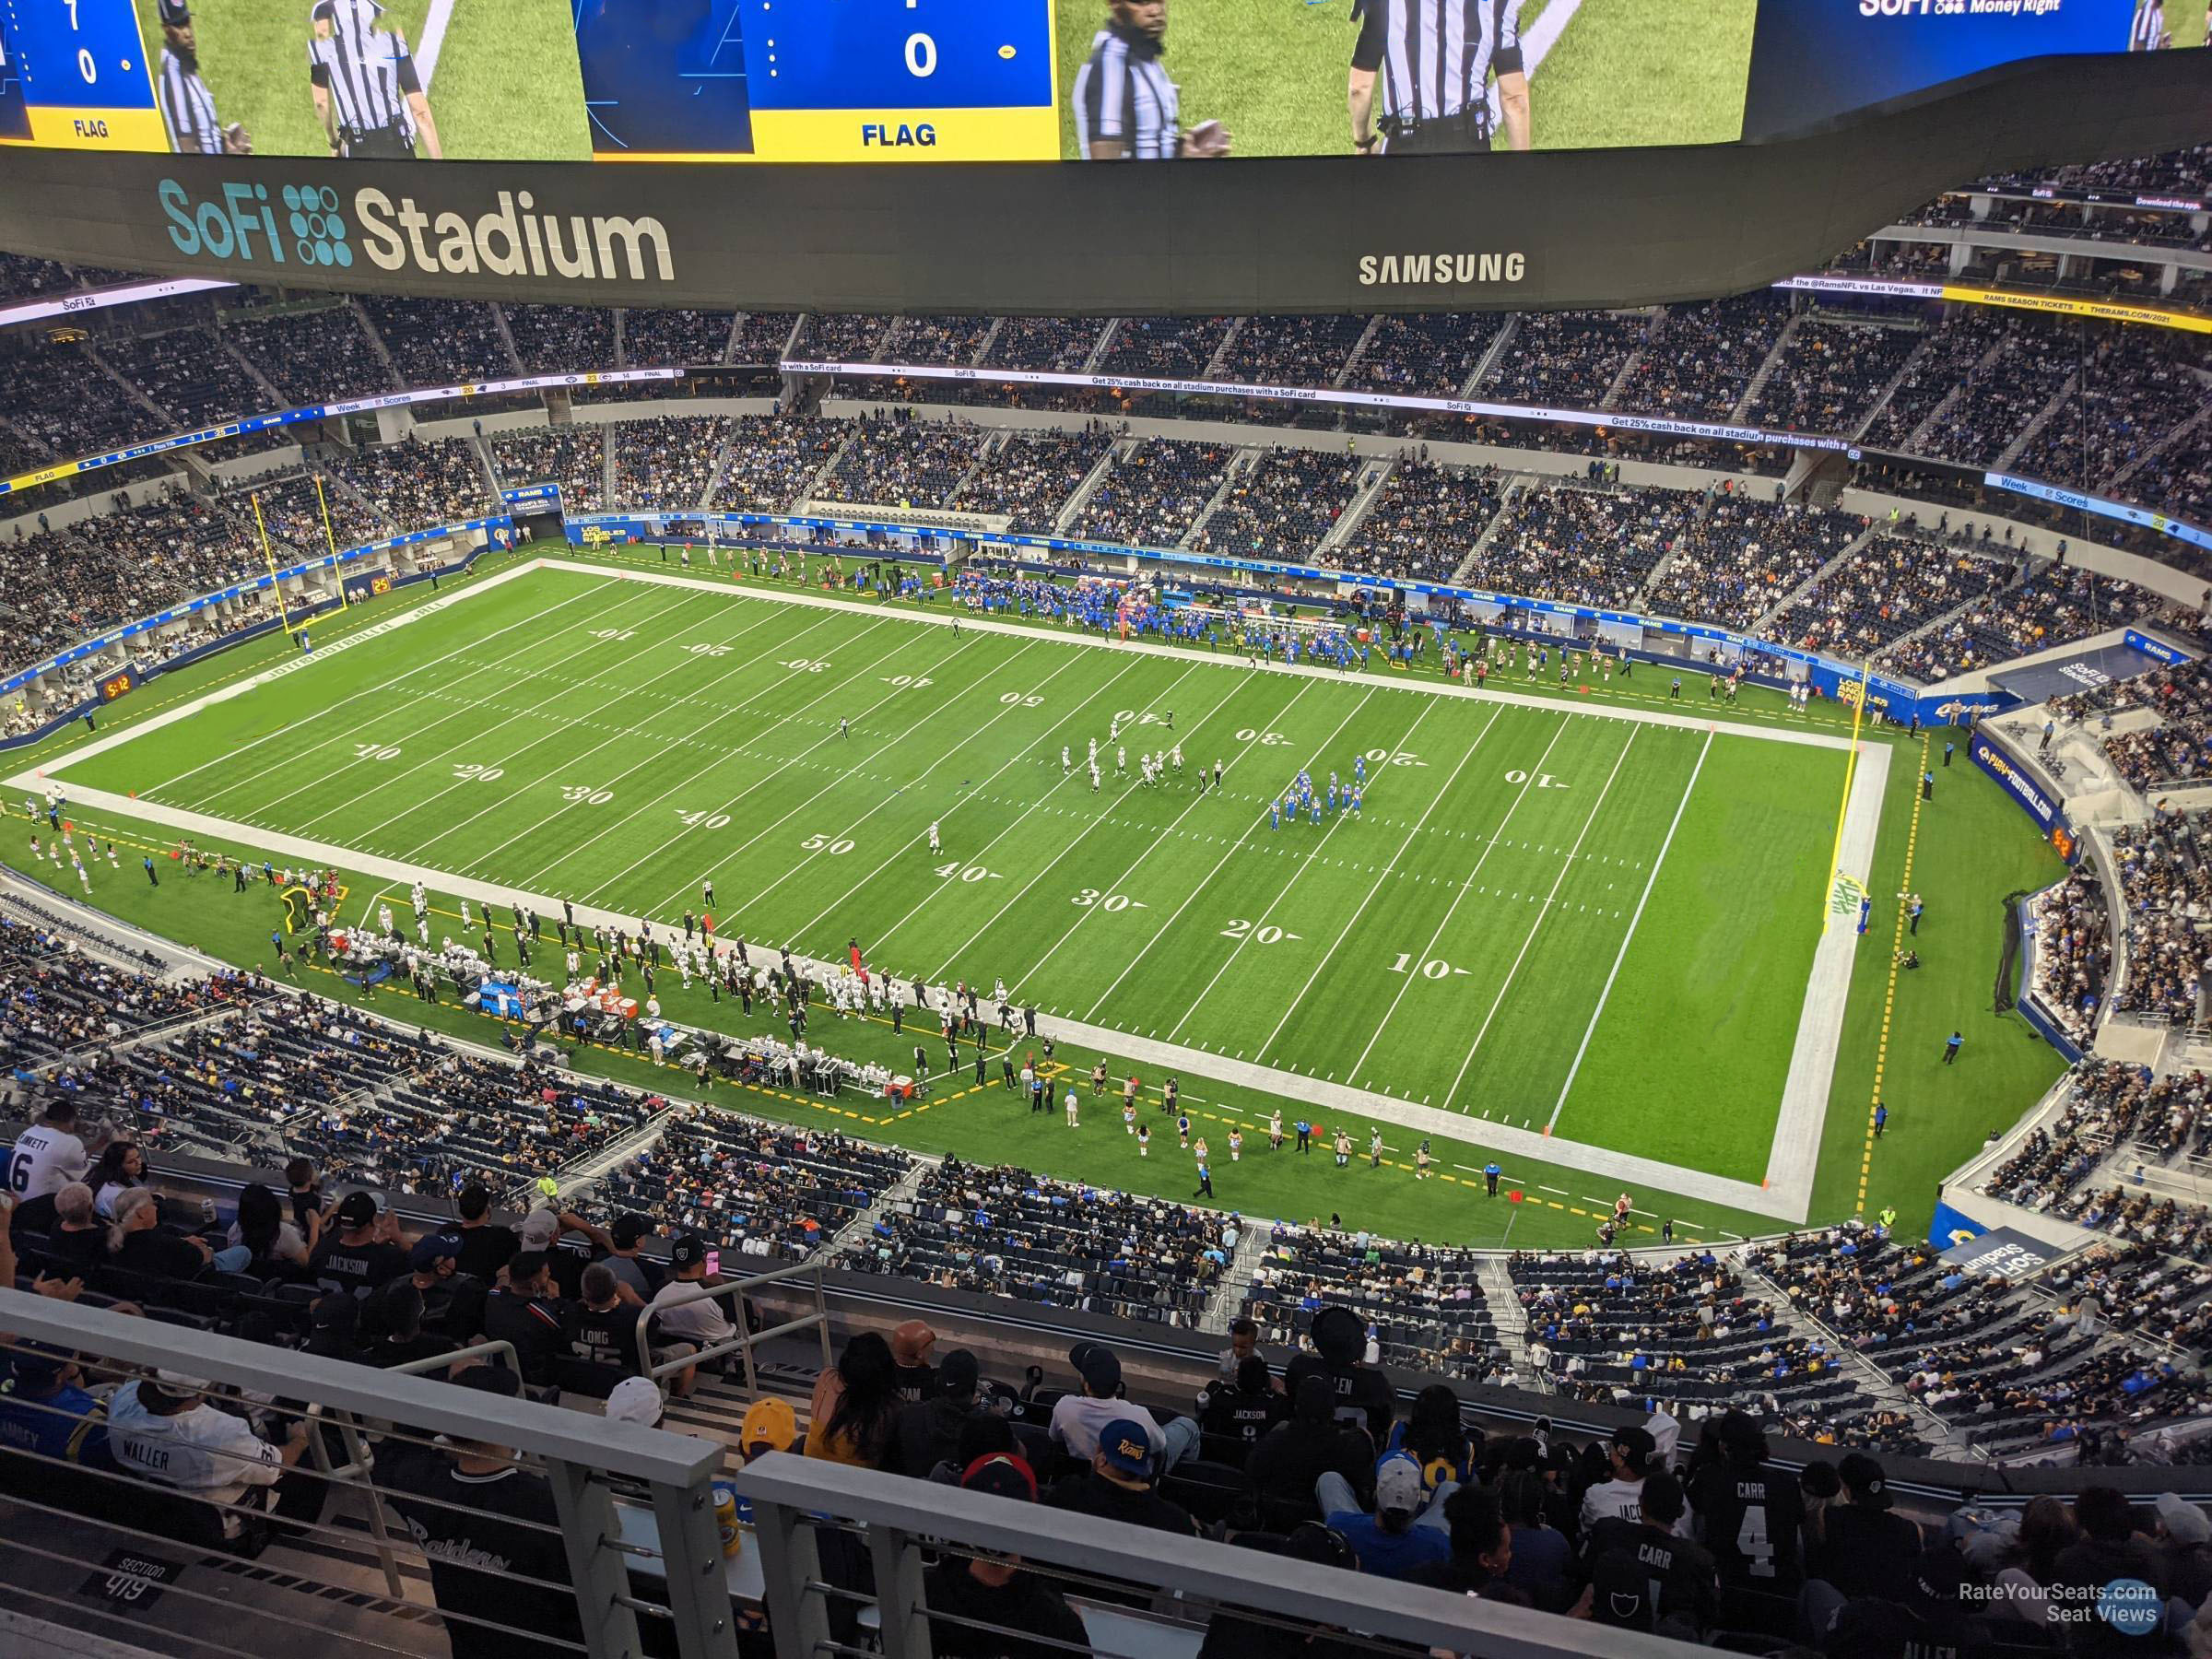 Take a virtual tour of SoFi Stadium with views from every section